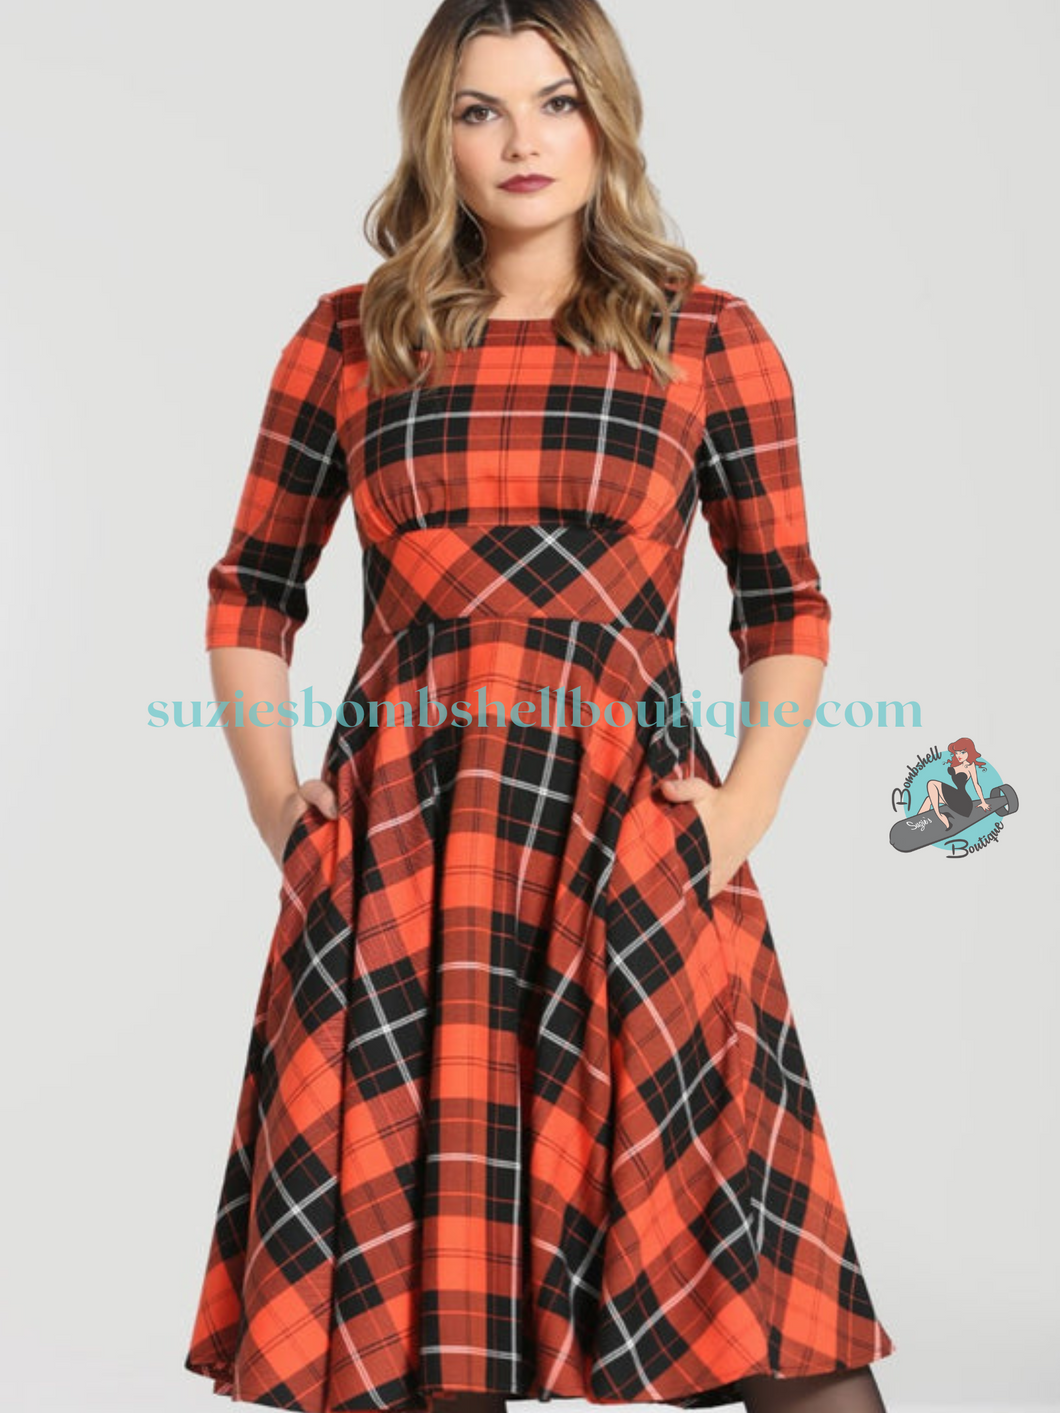 Hell Bunny Canada Hell Bunny Clementine 50s Swing Dress orange and black tartan plaid flared dress with pockets retro vintage pinup 50s dress altfashion goth halloween Canadian Pin-Up Shop Suzie's Bombshell Boutique